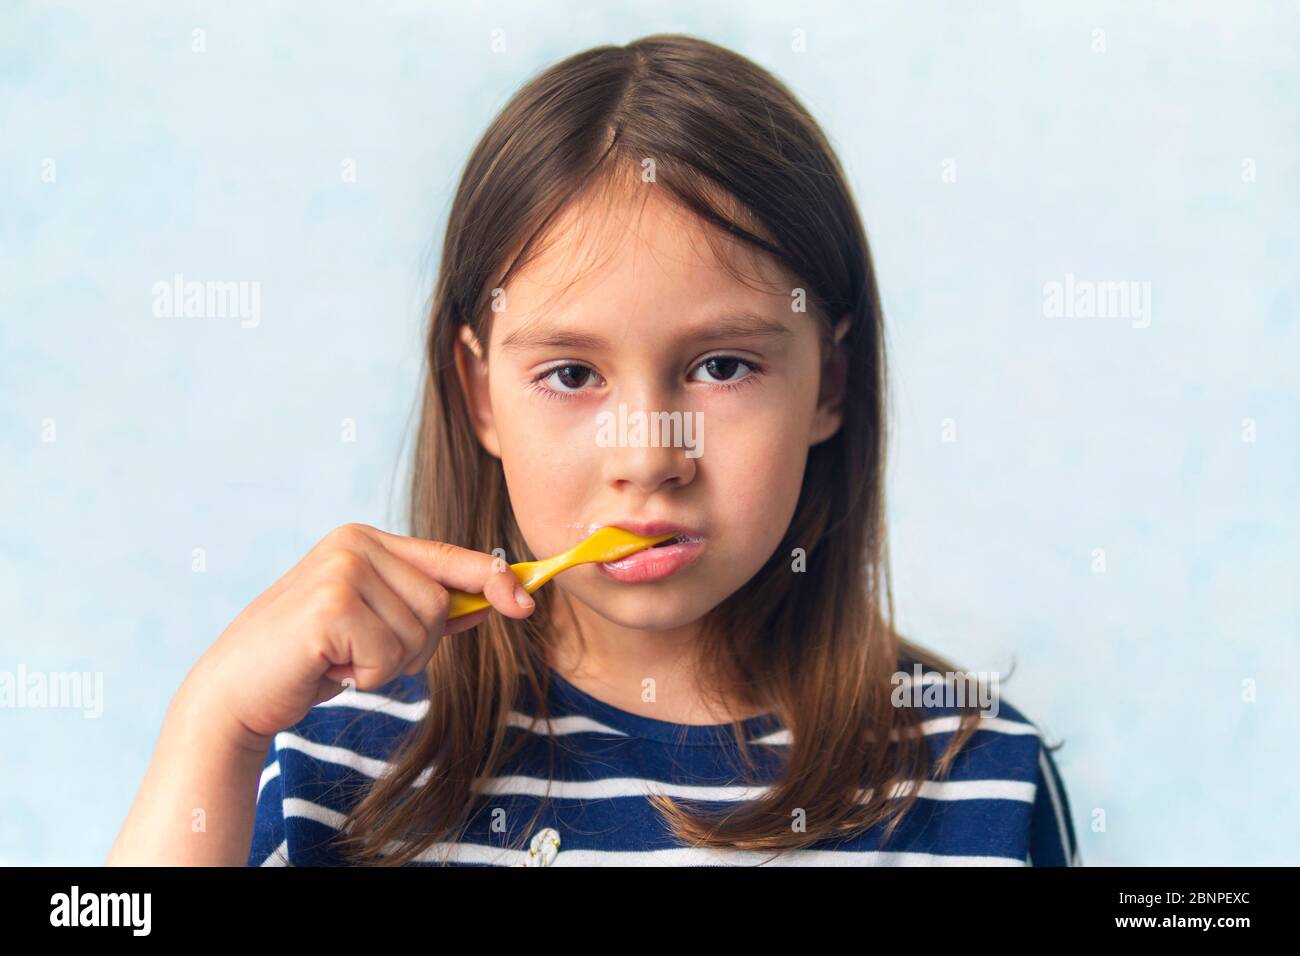 Toddler smiling while brushing her teeth. blue background. A little girl of Caucasian appearance brushing her teeth with a toothbrush, Hygiene procedu Stock Photo